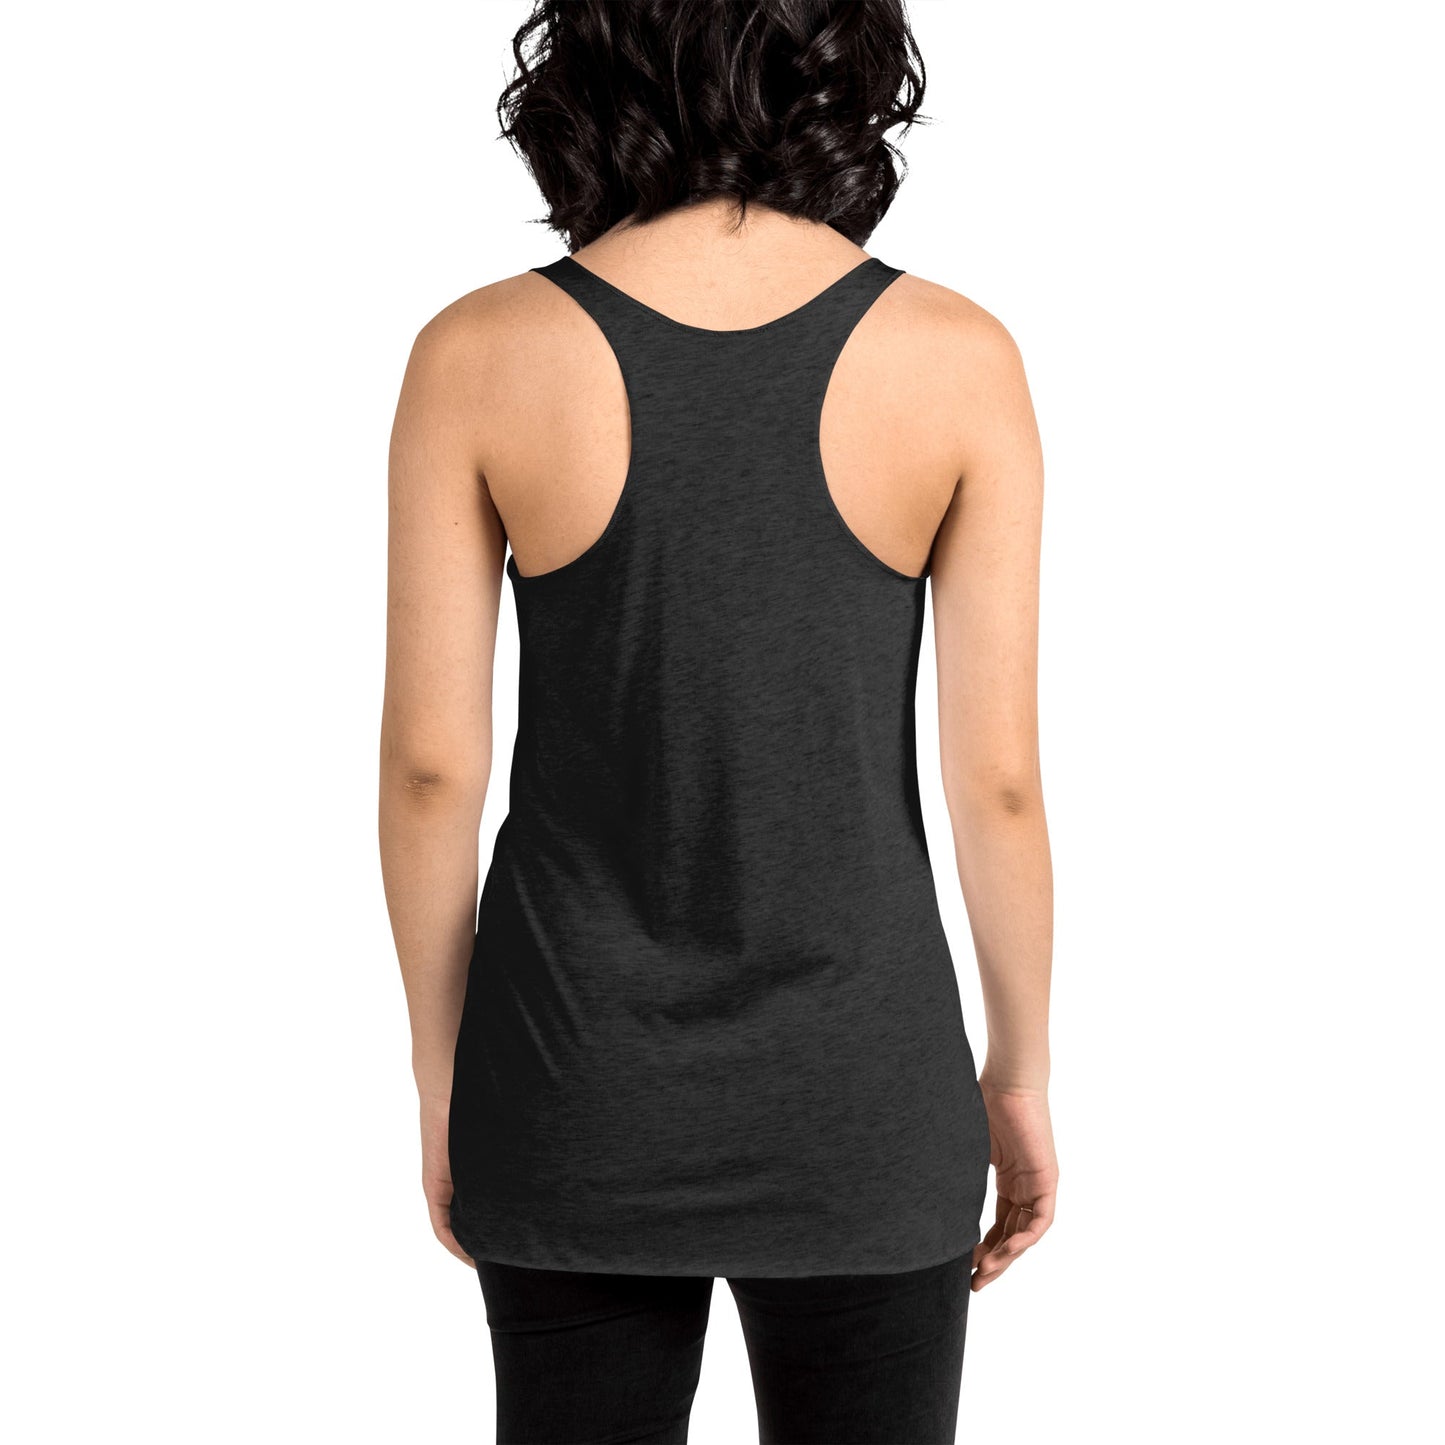 Women's Racerback Tank | The Baby-Eater - Spectral Ink Shop - Shirts & Tops -5157313_6651